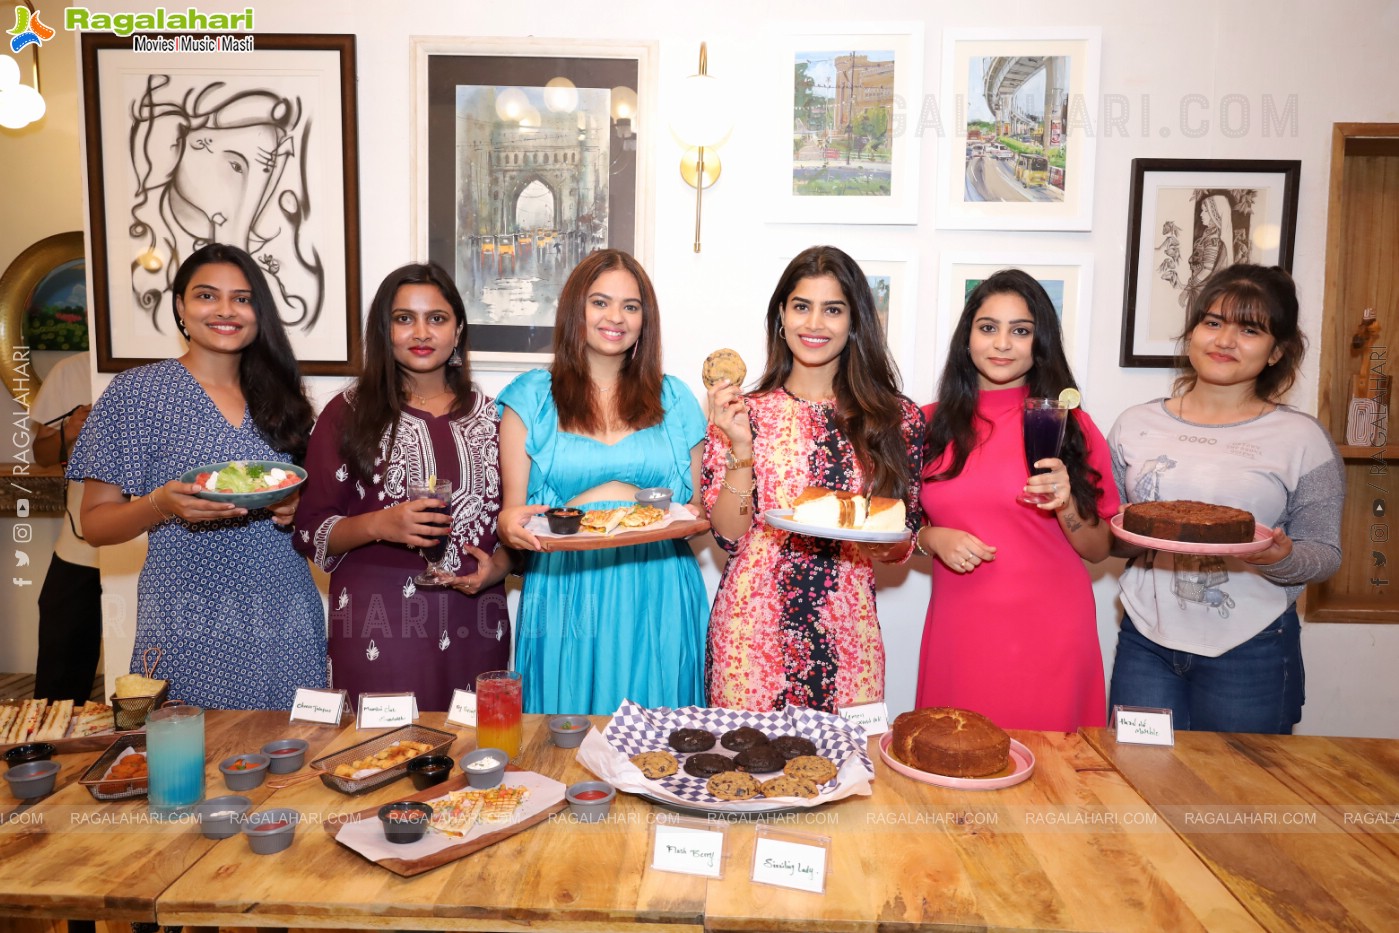 Grand Launch of The Grind Cafe - A Unique Cafe which Celebrates Art, Literature, Music & More